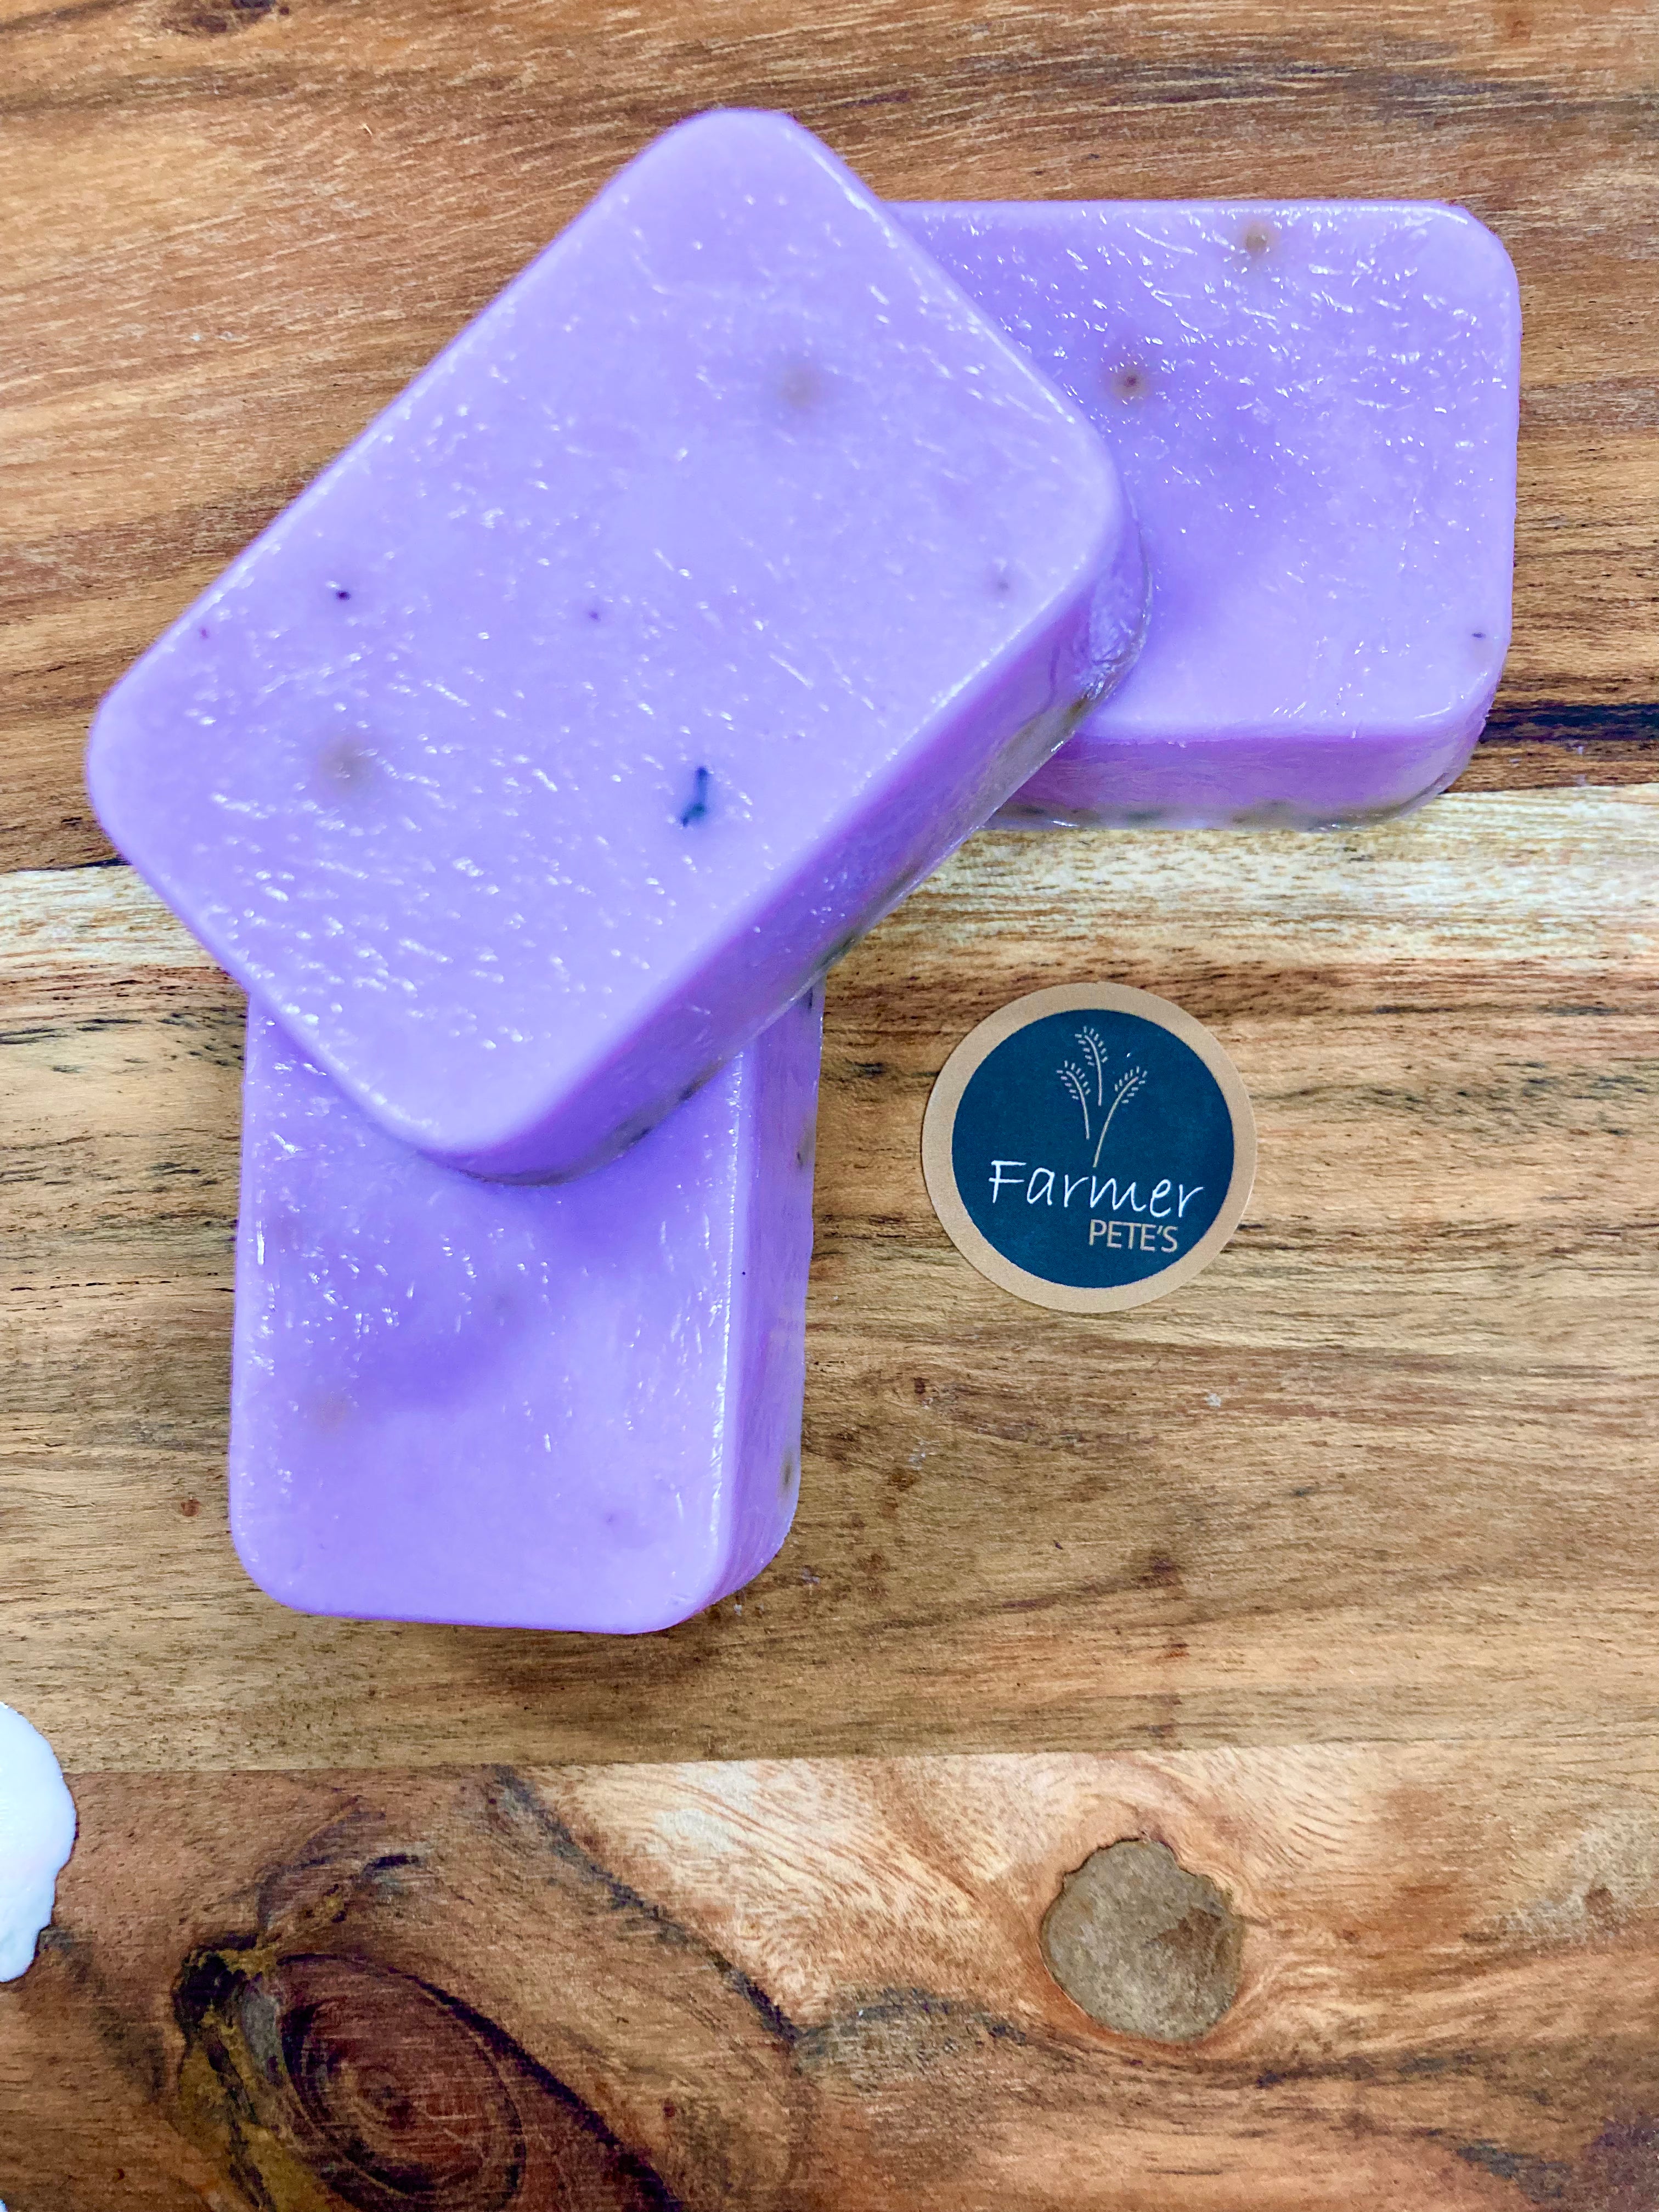 Calming goat&#39;s milk soap for dogs. Great for calming anxious pups. Made by Farmer Pete&#39;s.